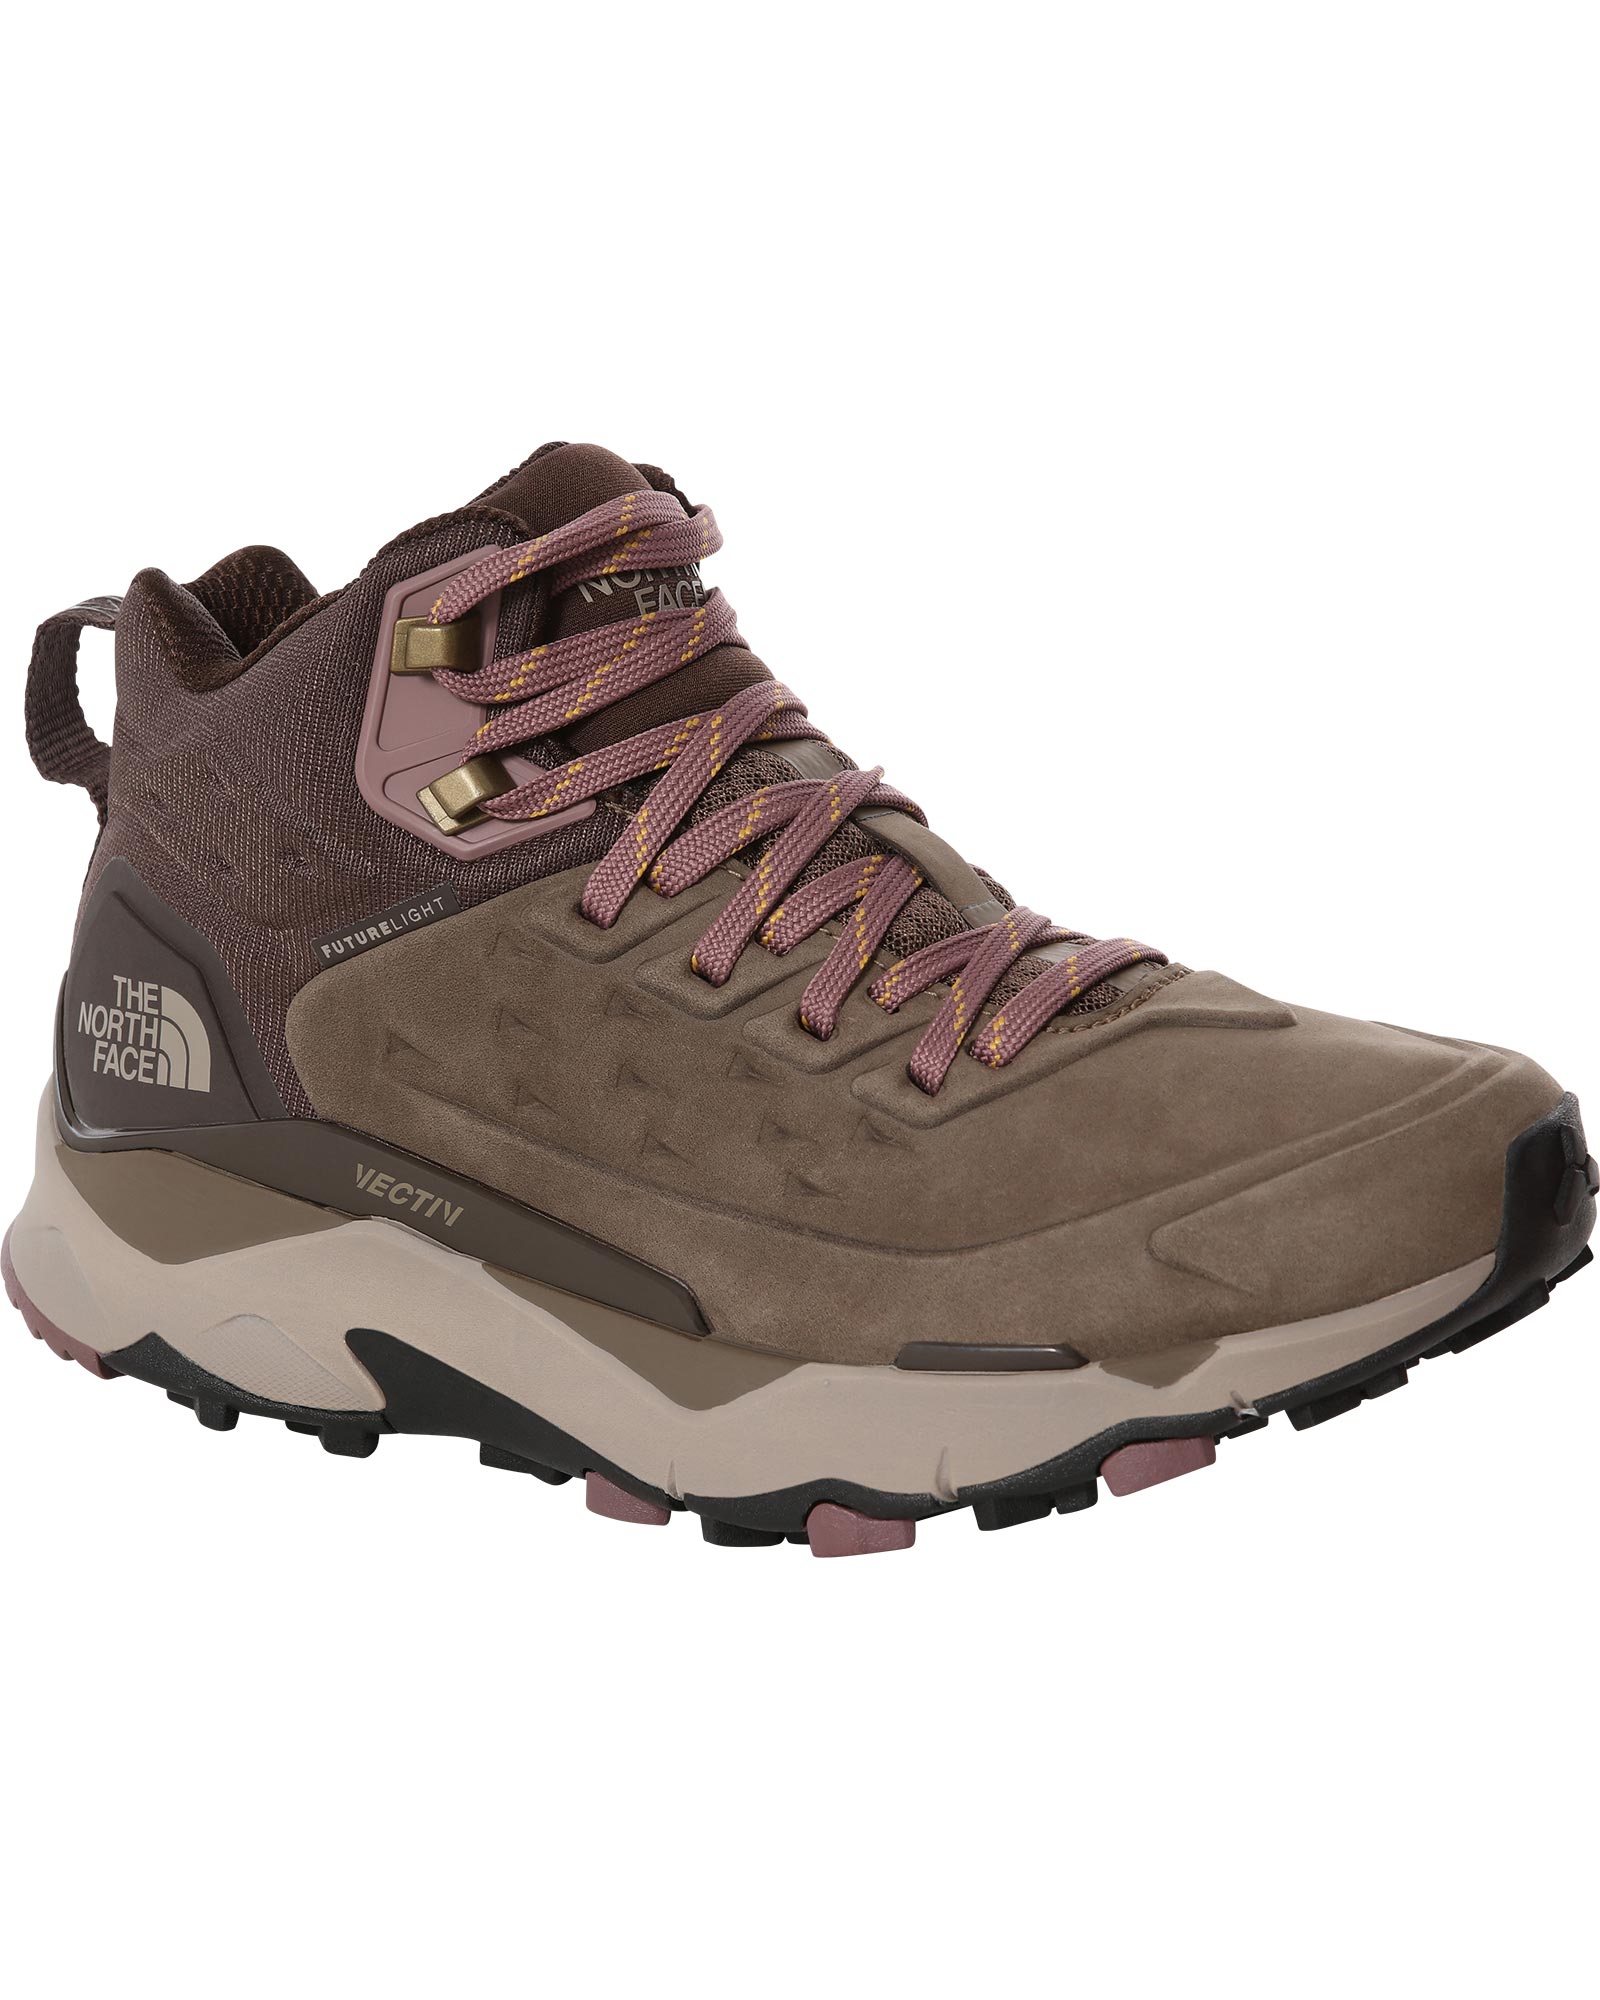 The North Face Vectiv Exploris Leather Mid FUTURELIGHT Women’s Boots - Bipartisan Brown/Coffee Brown UK 5